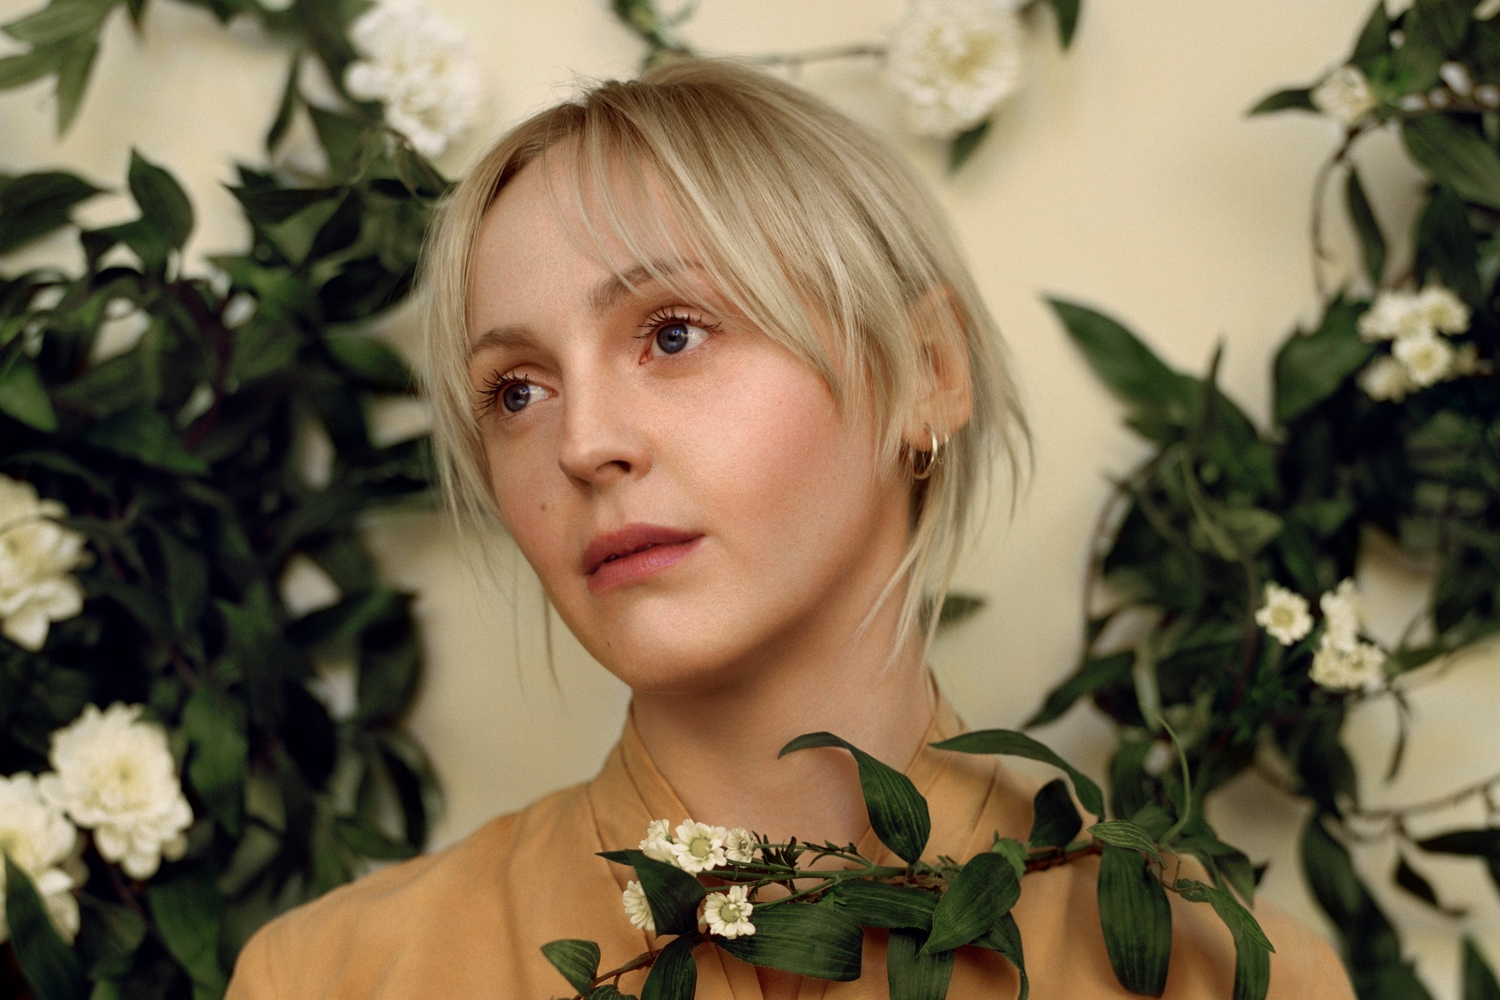 This woman's work: Laura Marling